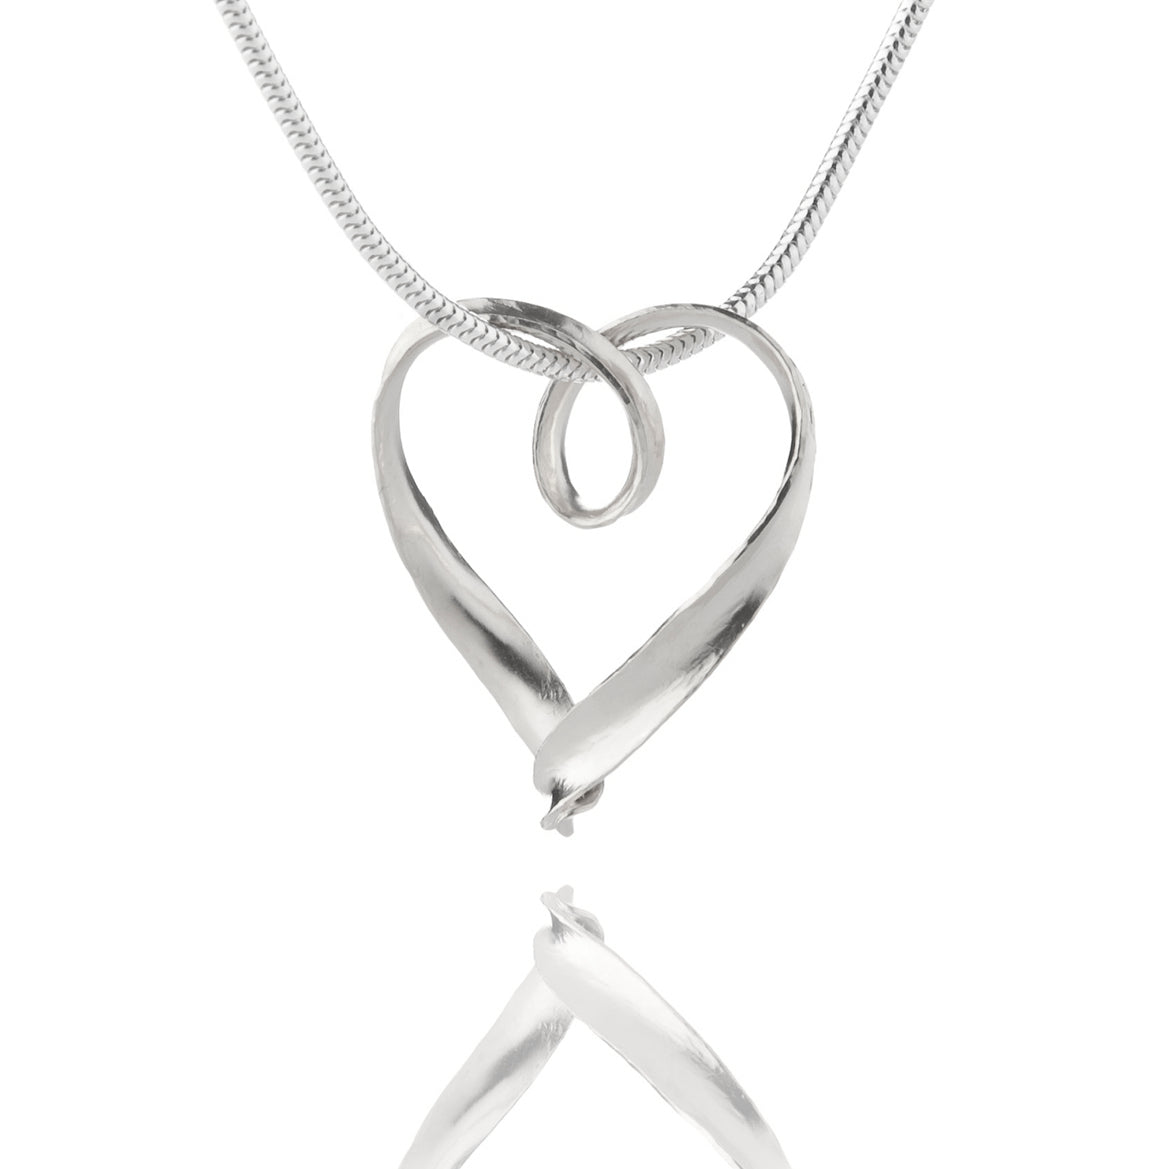 A simple silver heart pendant formed from a continuous strip of recycled silver, hanging from a silver snake chain which passes through a loop in the heart.